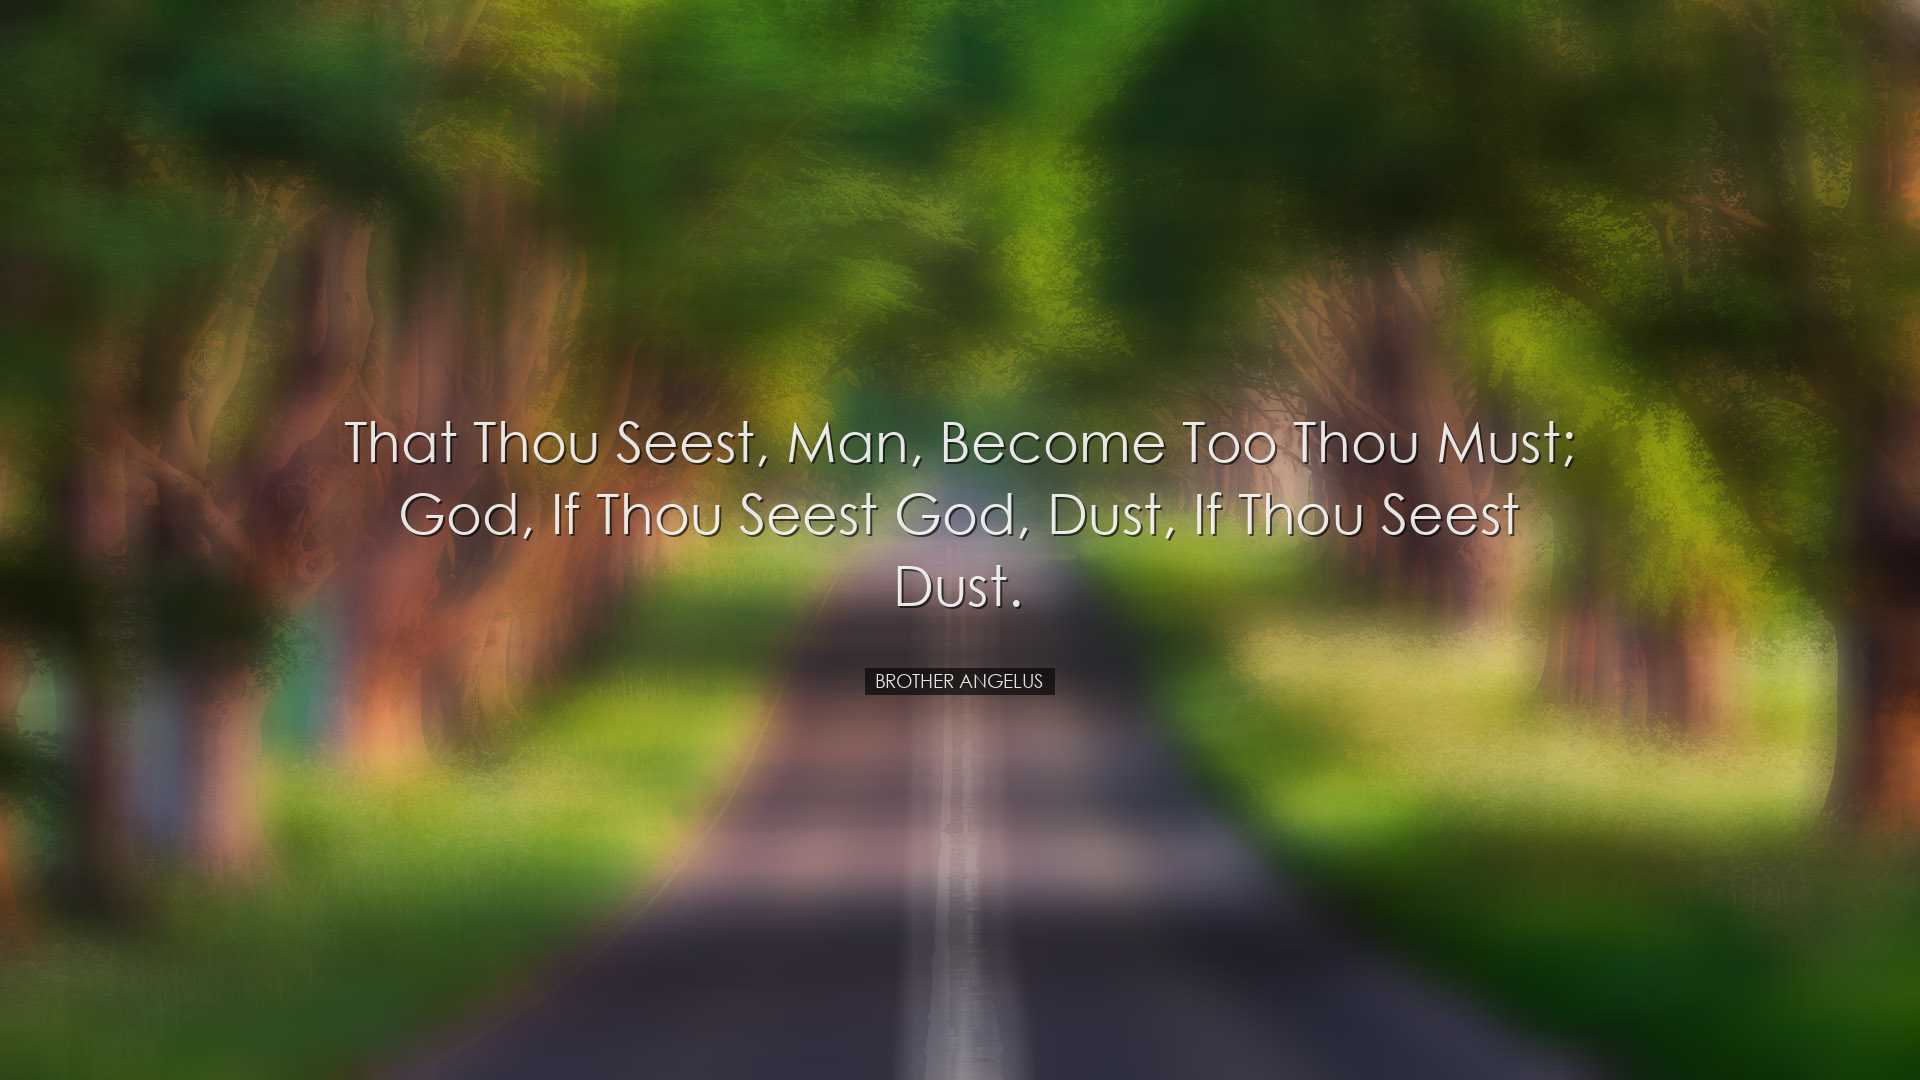 That thou seest, man, become too thou must; God, if thou seest God